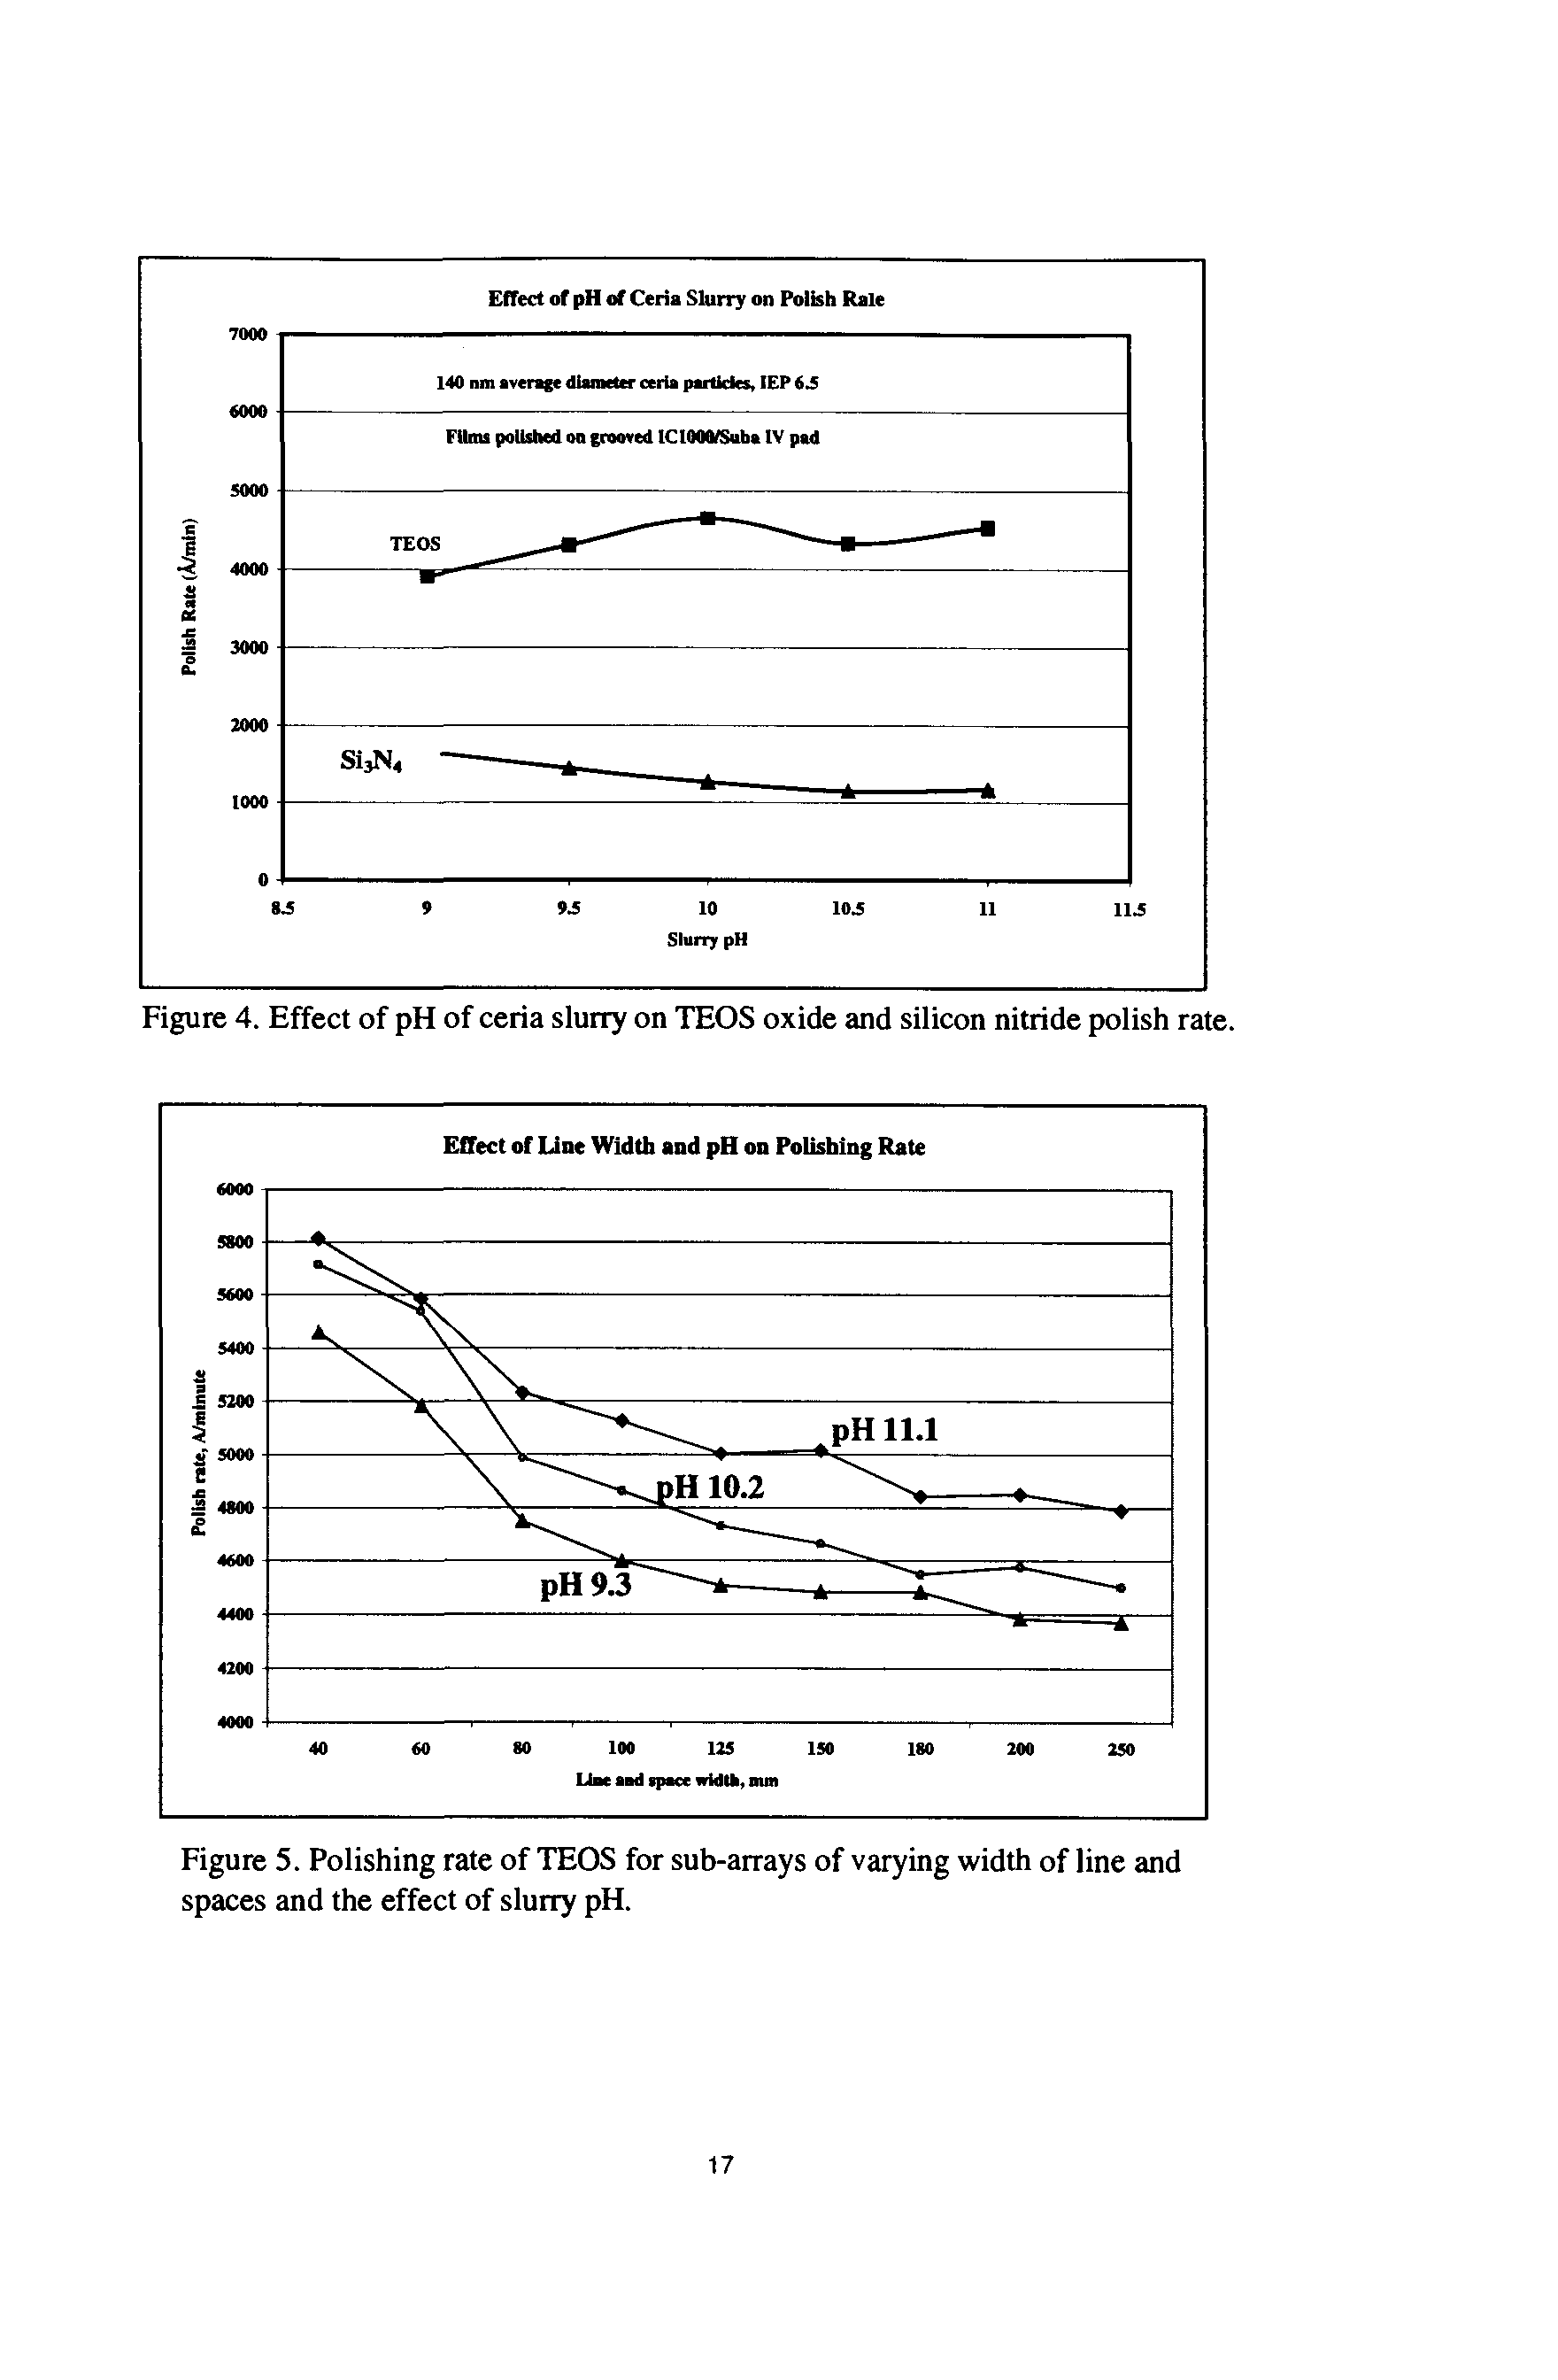 Figure 5. Polishing rate of TEOS for sub-arrays of varying width of line and spaces and the effect of slurry pH.